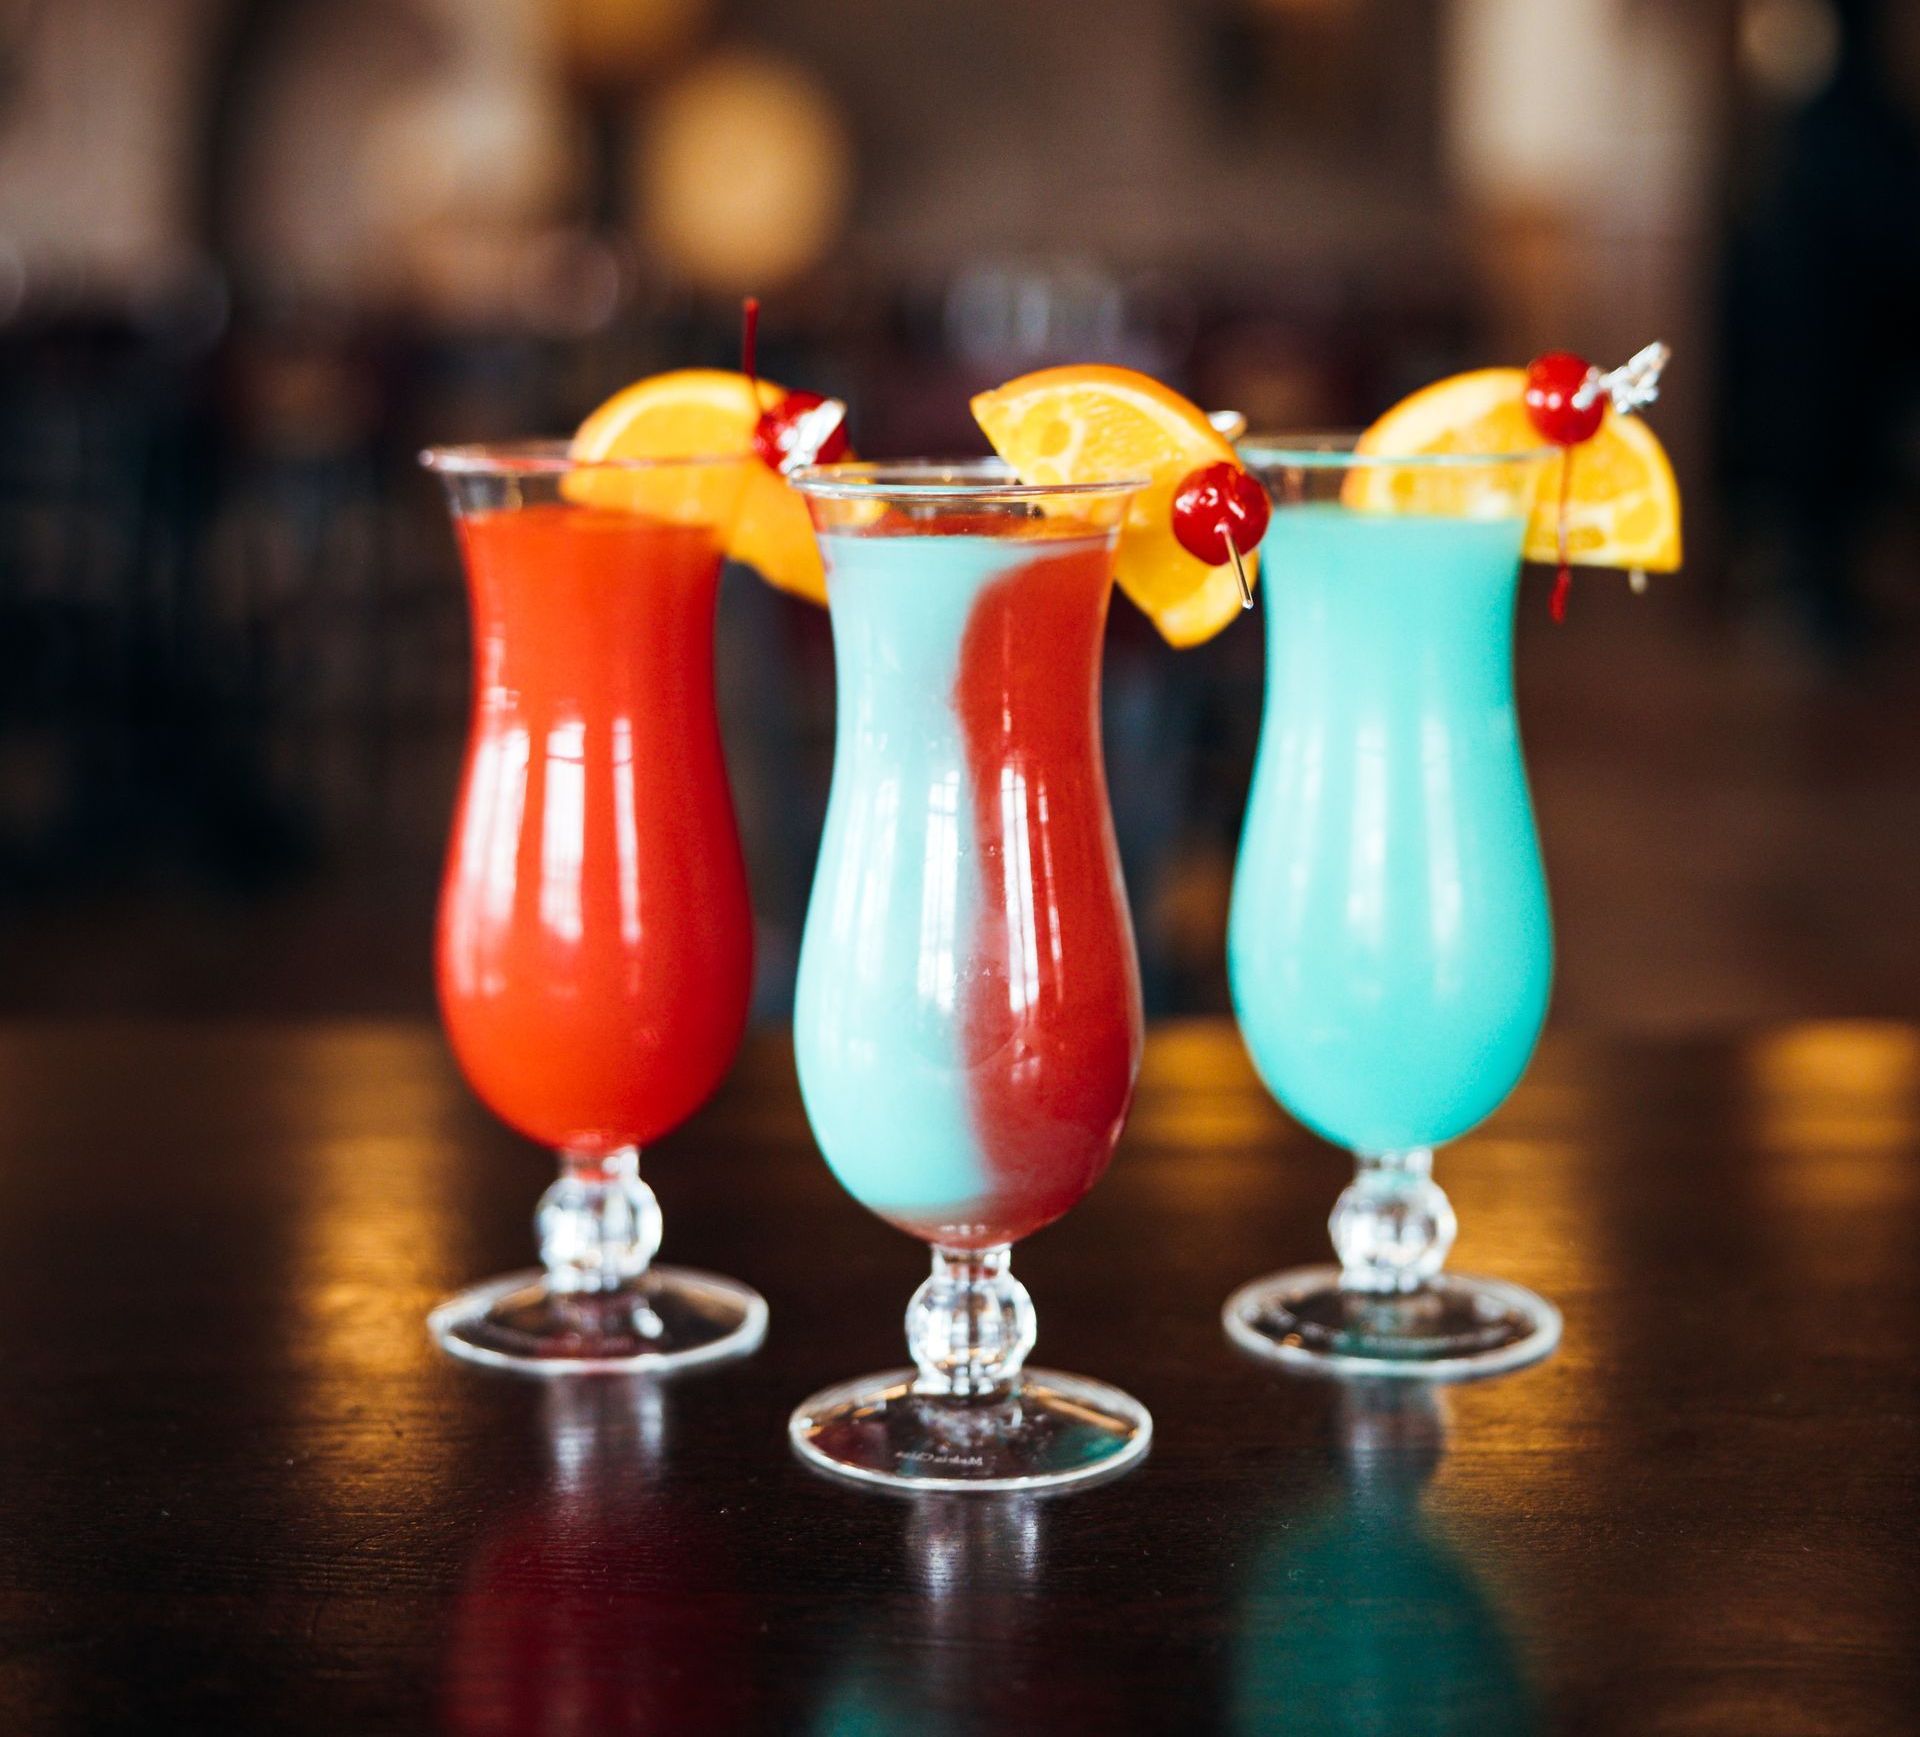 Satisfy Your Cocktail Craving With the Red Dragon, Blue Dragon, or Mixed Dragon Cocktail at the Hill